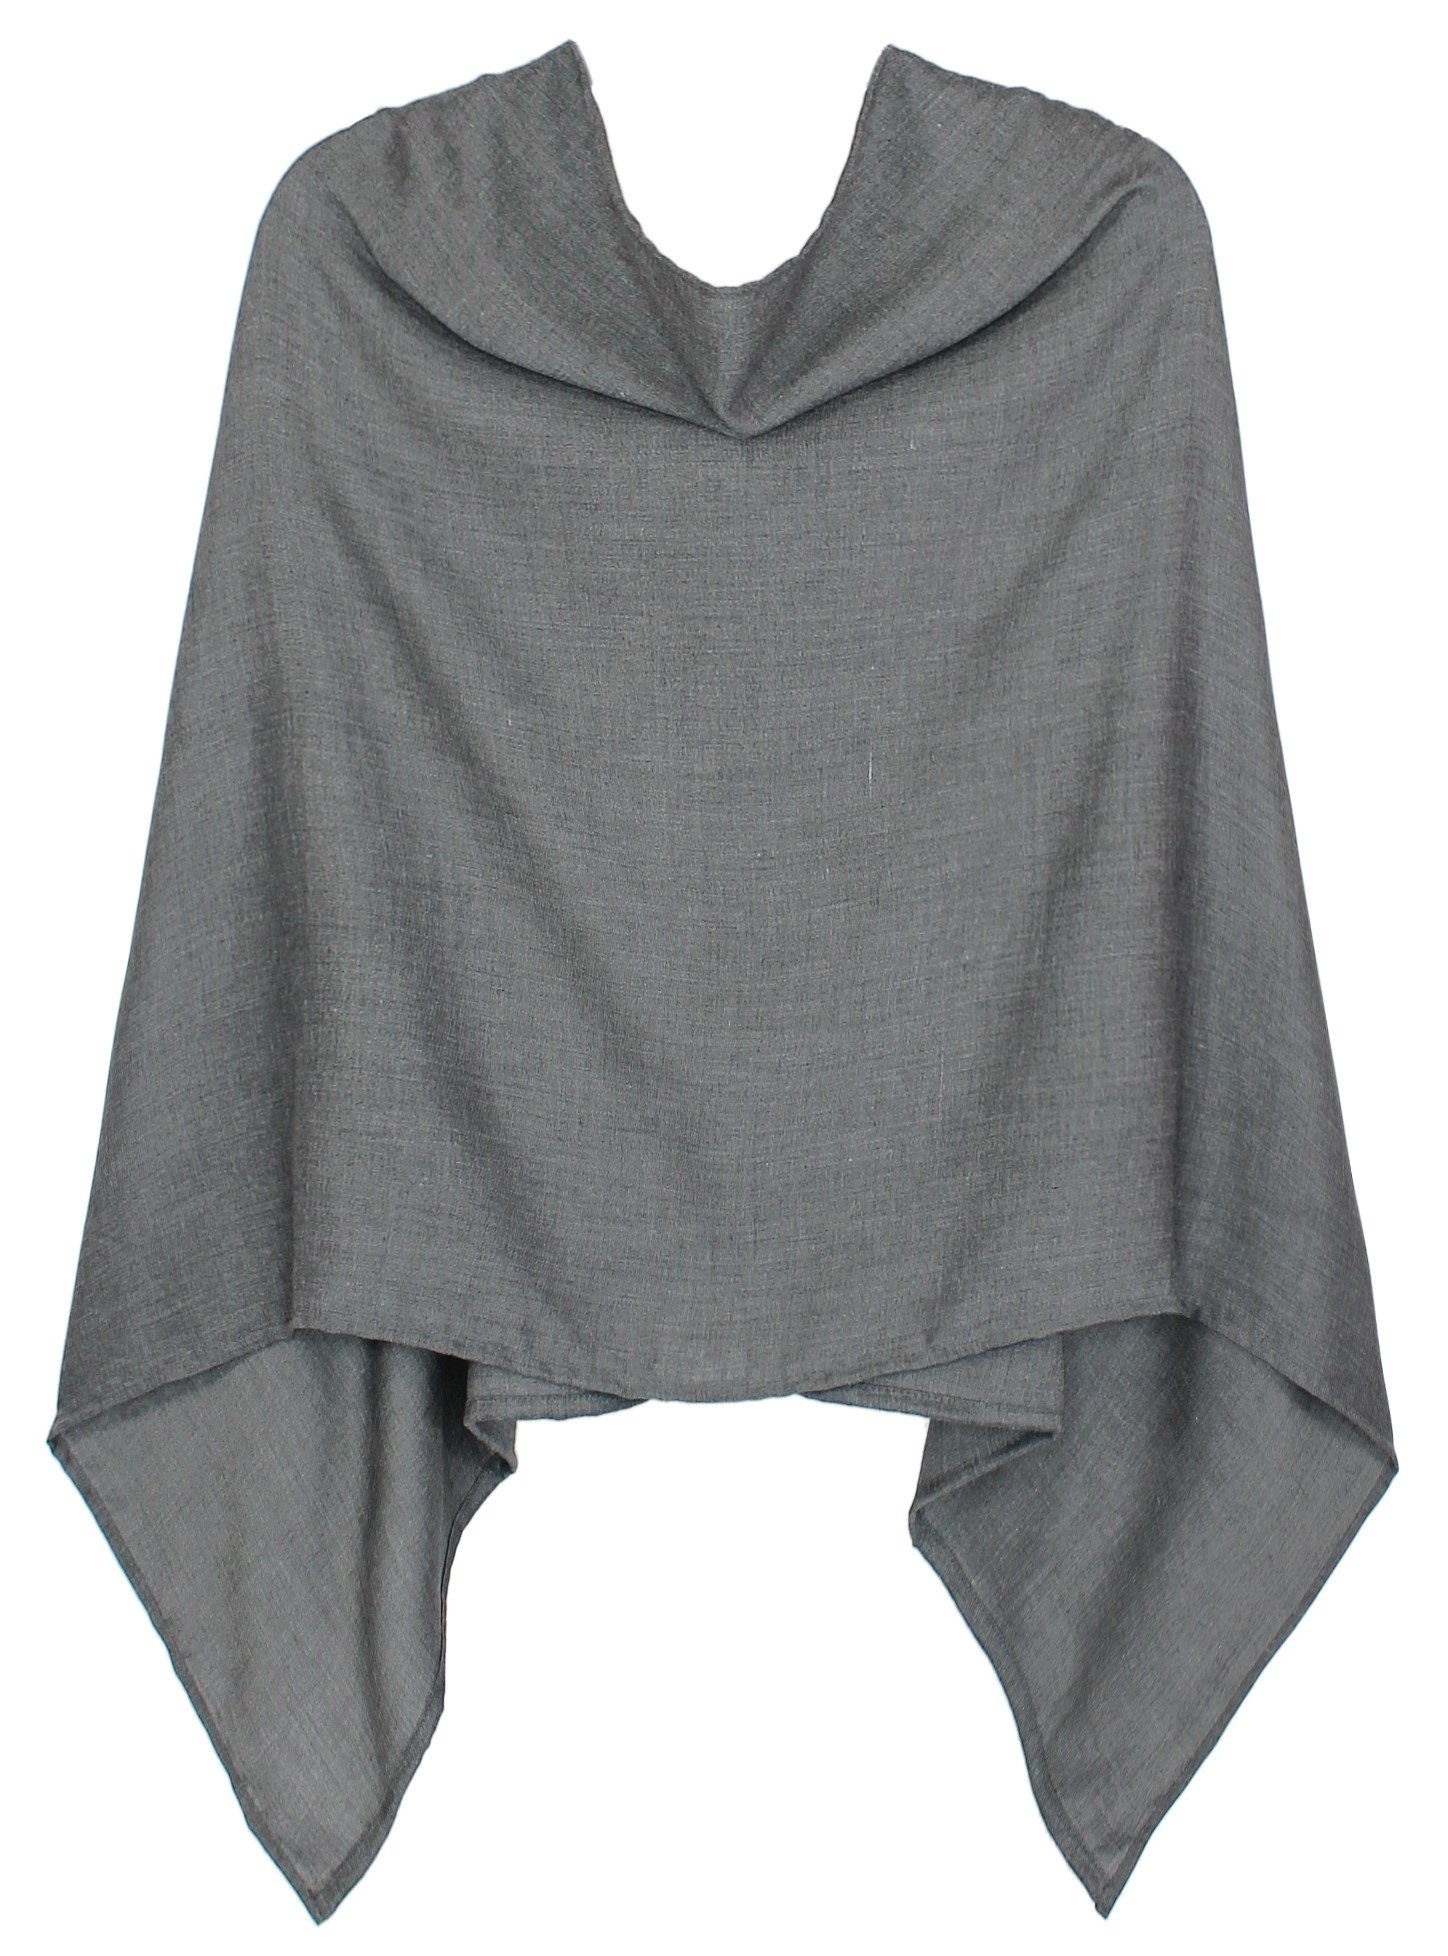 dy_mode Blusenponcho Damen Poncho in Unifarben Leichtes Cape Sommerponcho Umhang in Unifarbe, Seitlich Lang Schnitt